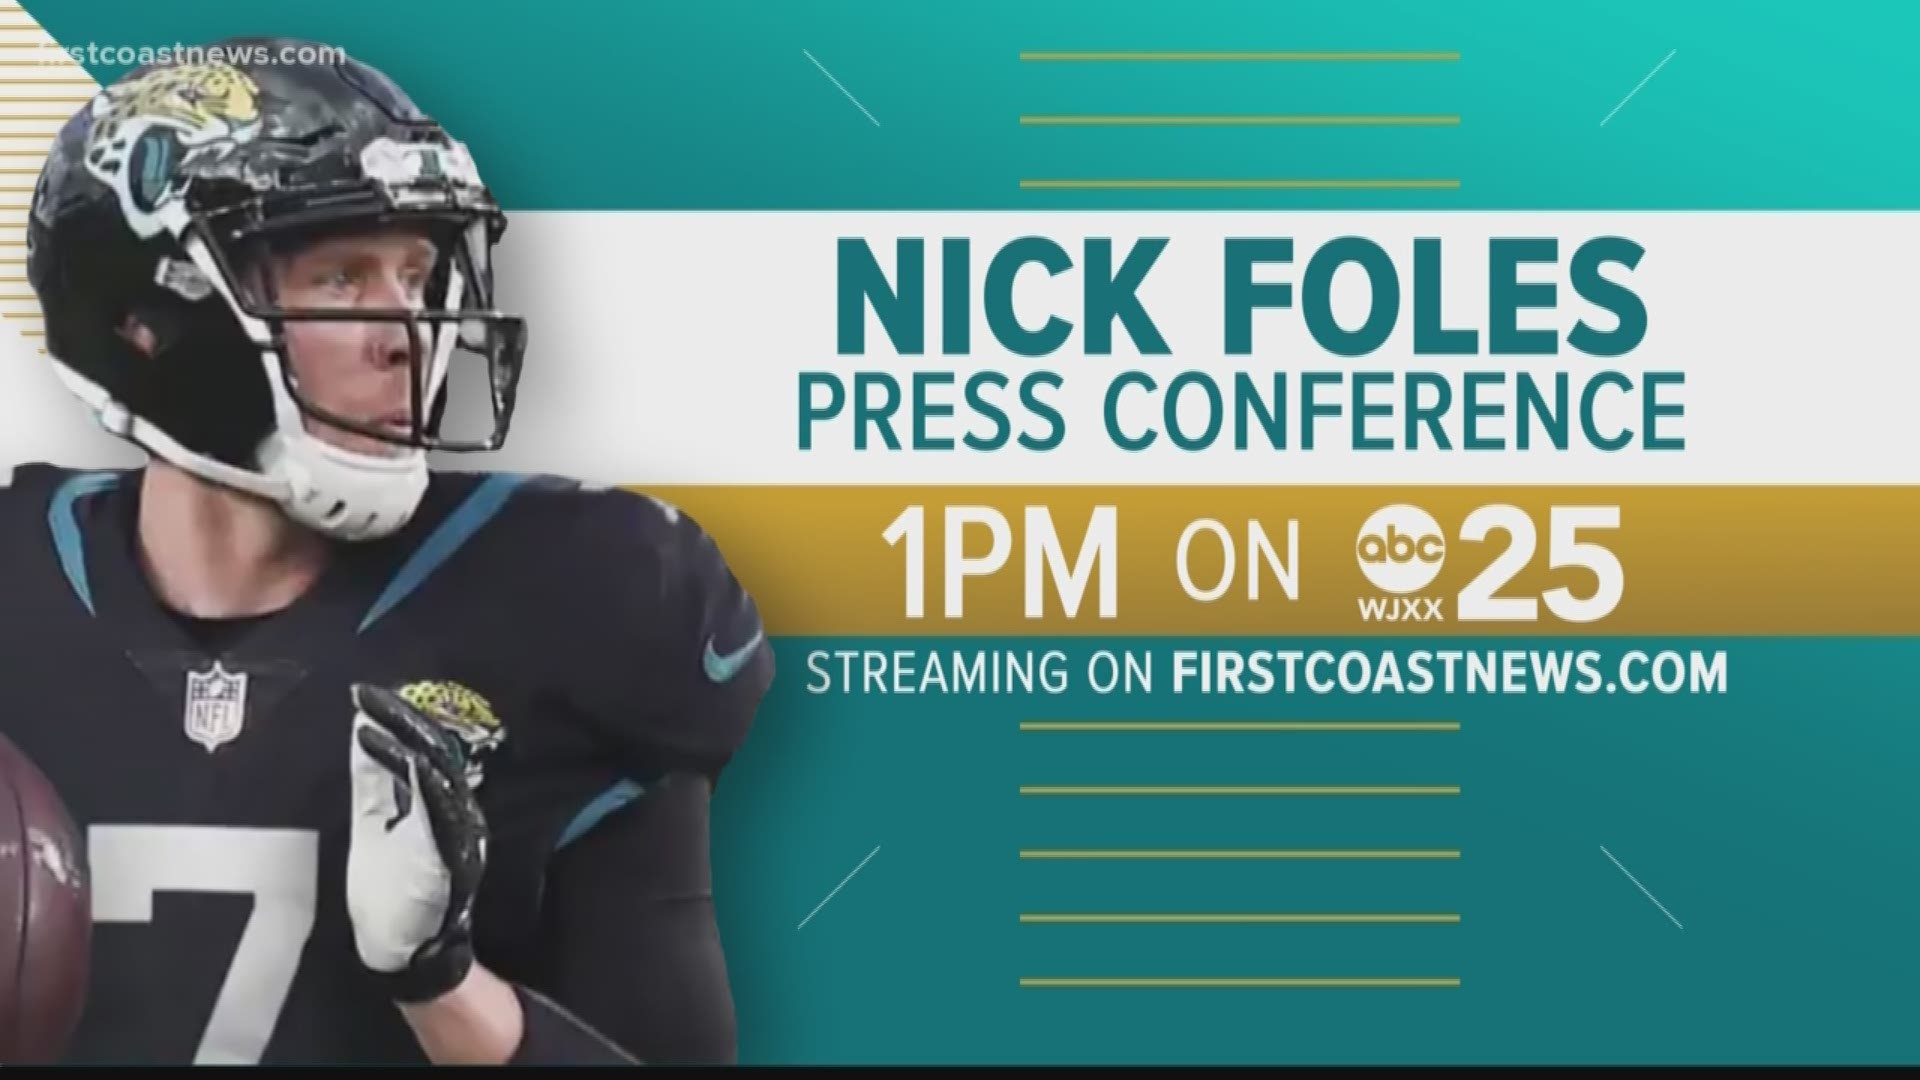 Foles' introductory press conference with the media will take place Thursday at 1 p.m. First Coast News will stream the press conference on ABC-25 and FirstCoastNews.com.